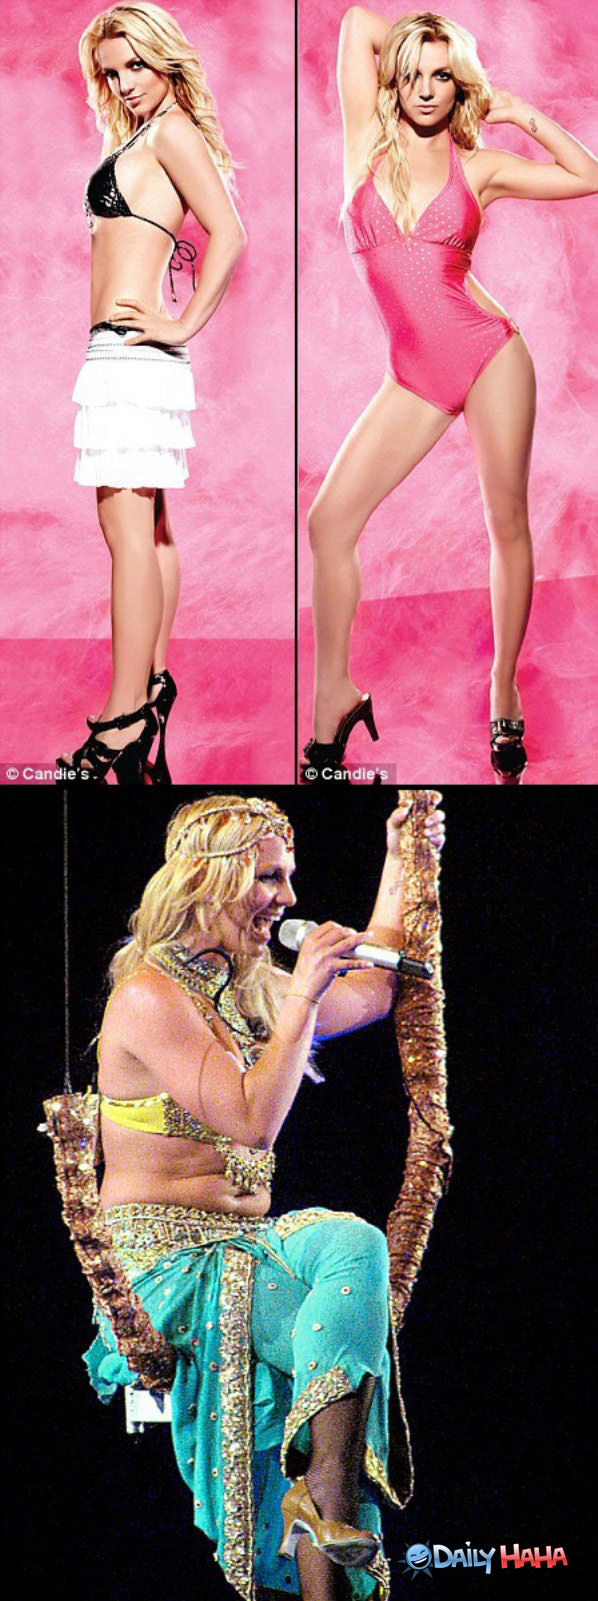 What Happened to Britney funny picture